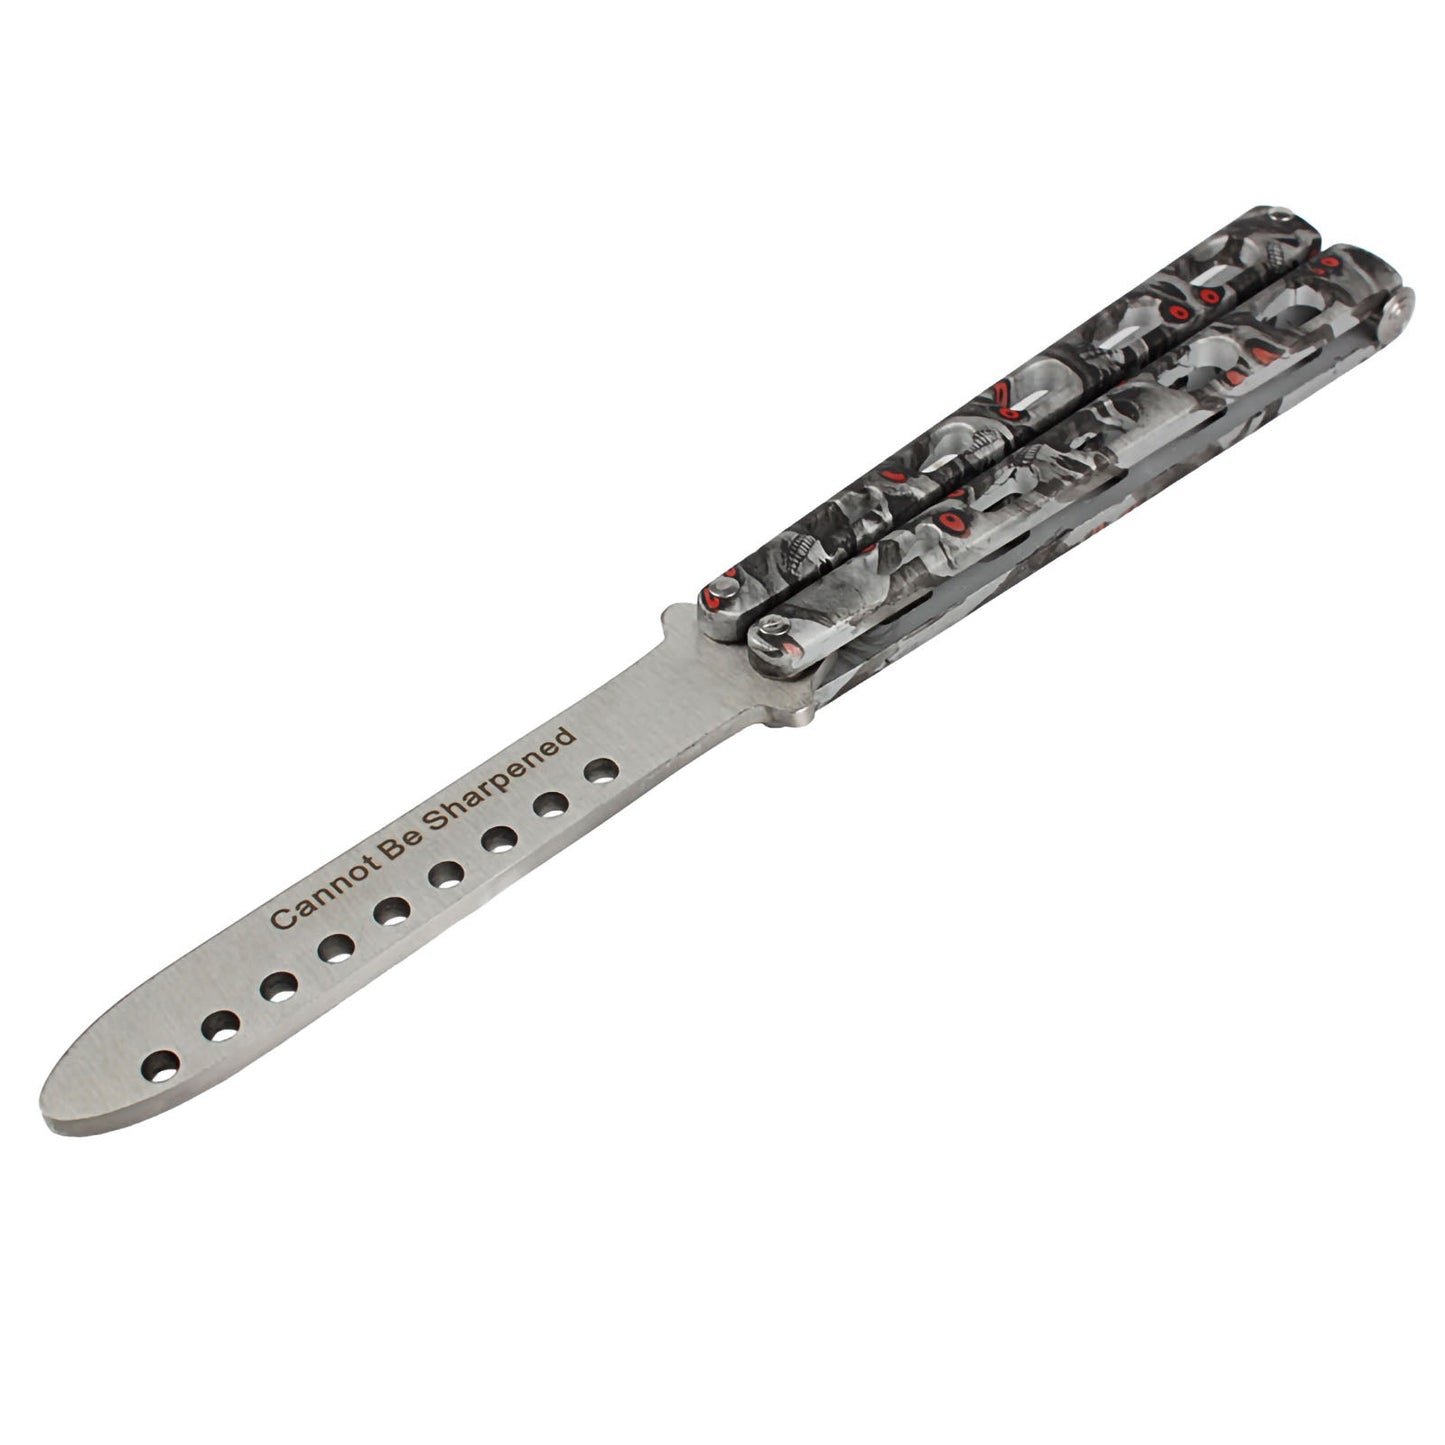 Andux Balisong Flip Trainer Tool Thick Blade 11-HDD-001 Grey(Only Available in European Countries)